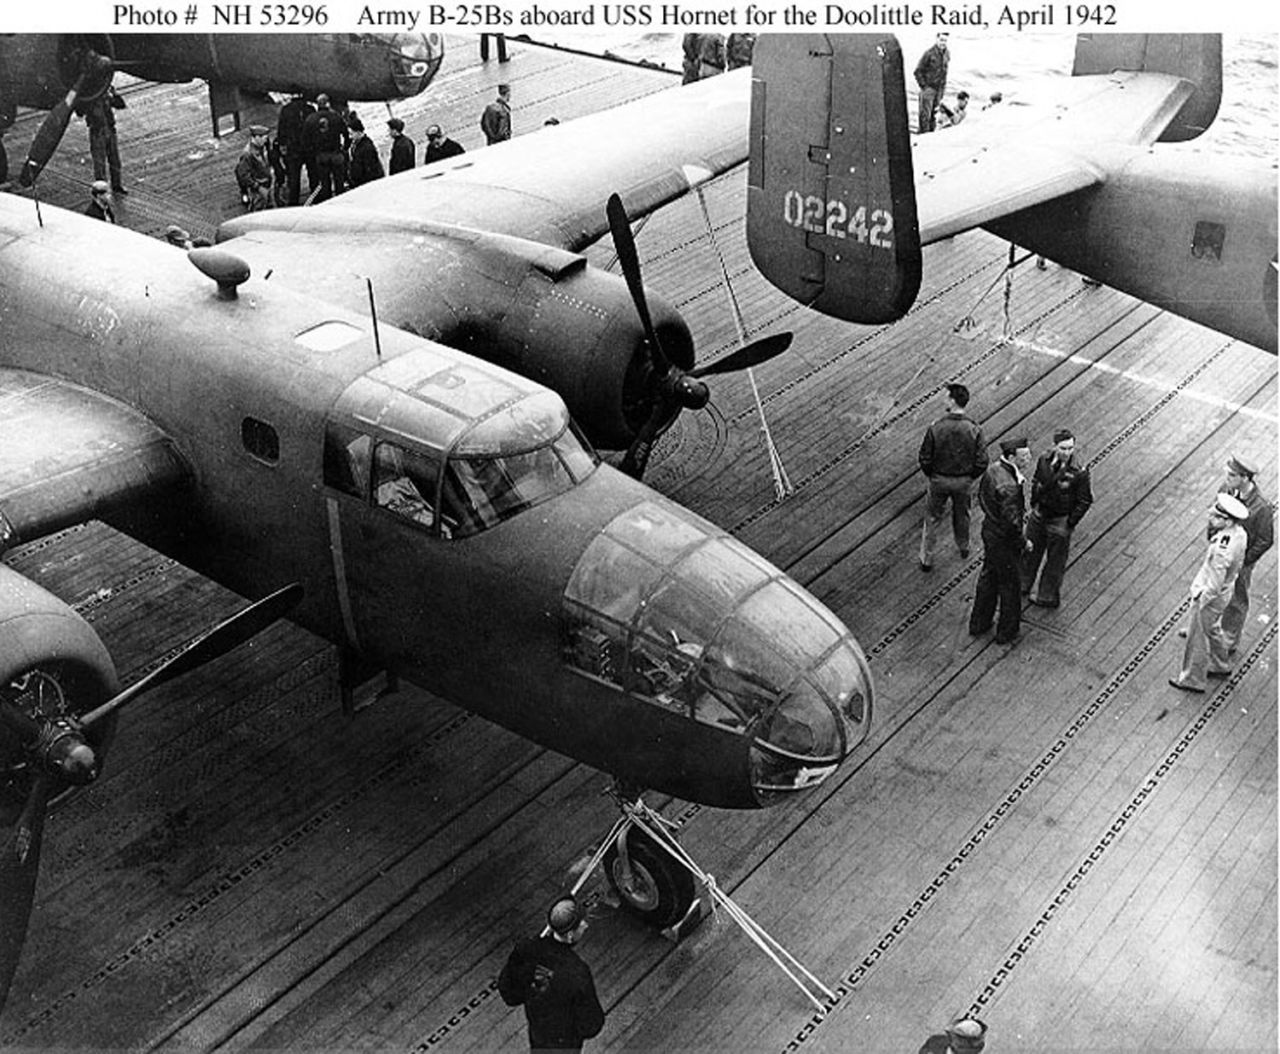 The Mitchells gained a reputation as perhaps the most versatile aircraft of World War II. It "was used for high- and low-level bombing, strafing, photo reconnaissance, submarine patrol, and even as a fighter," according to Boeing. They were also known for their loud engine noise inside the cockpit and crew cabin.